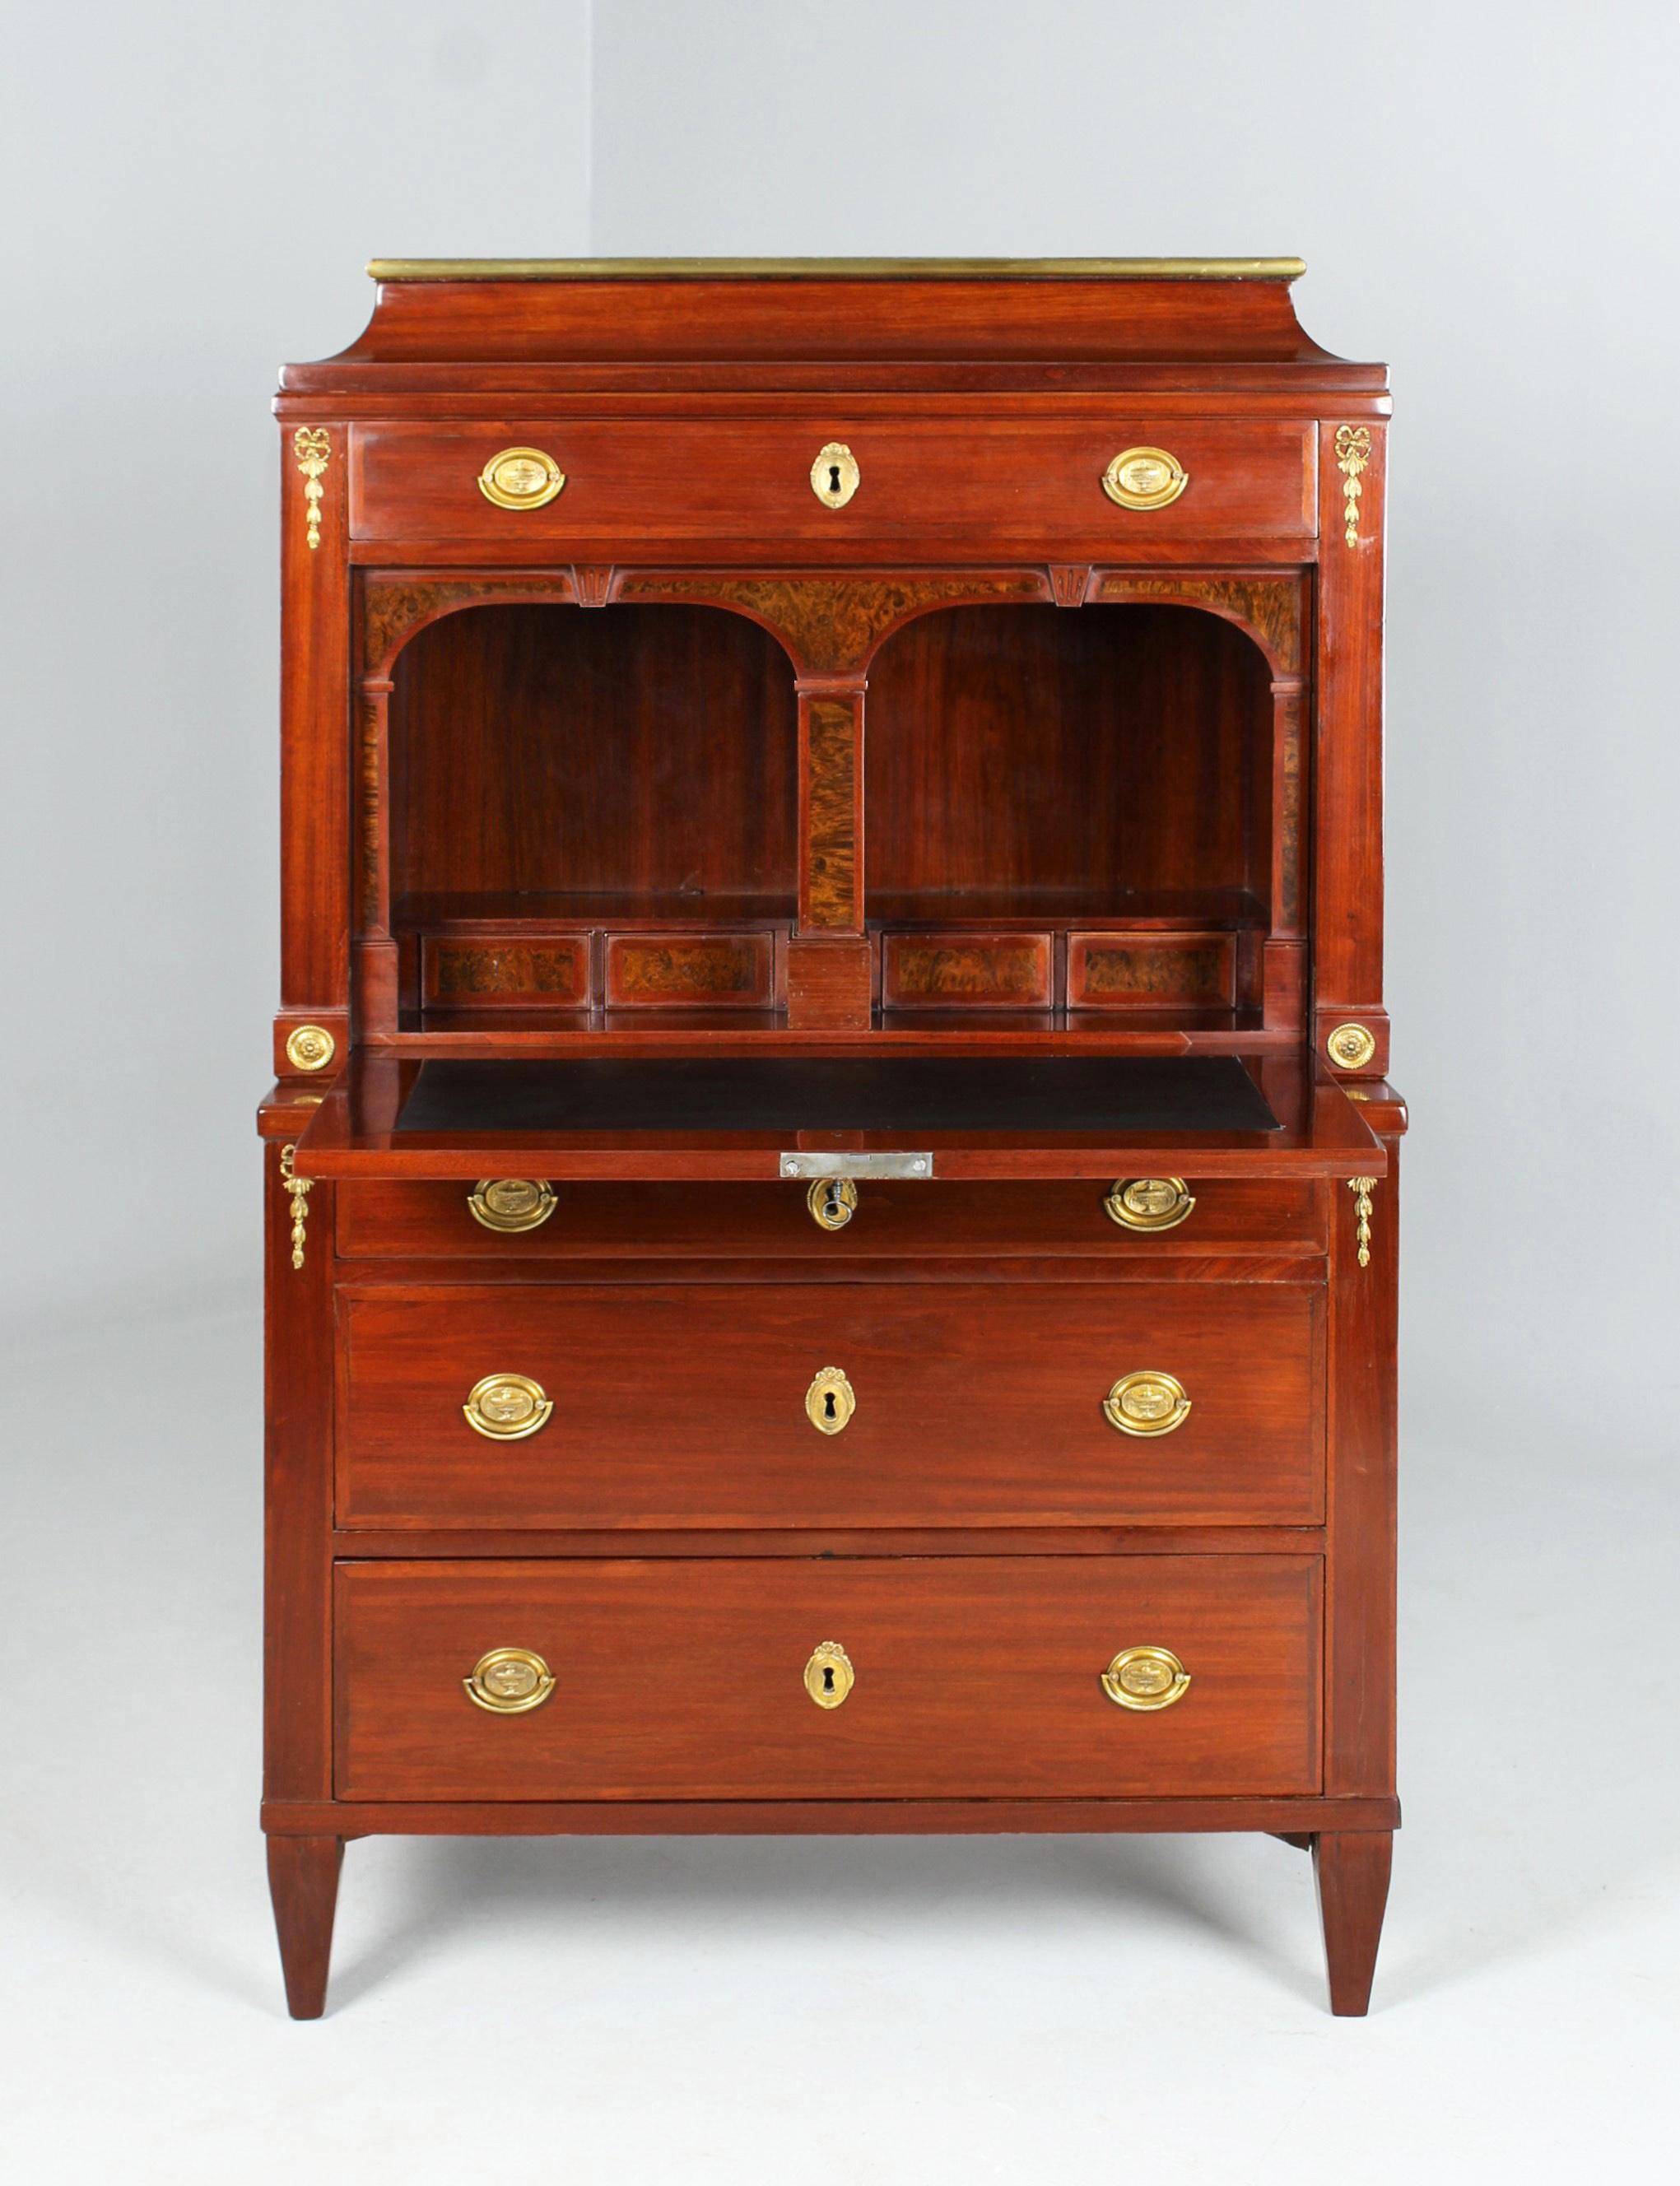 Late 18th or Early 19th Century Secretary with Hidden Mechanisms, Mahogany For Sale 3